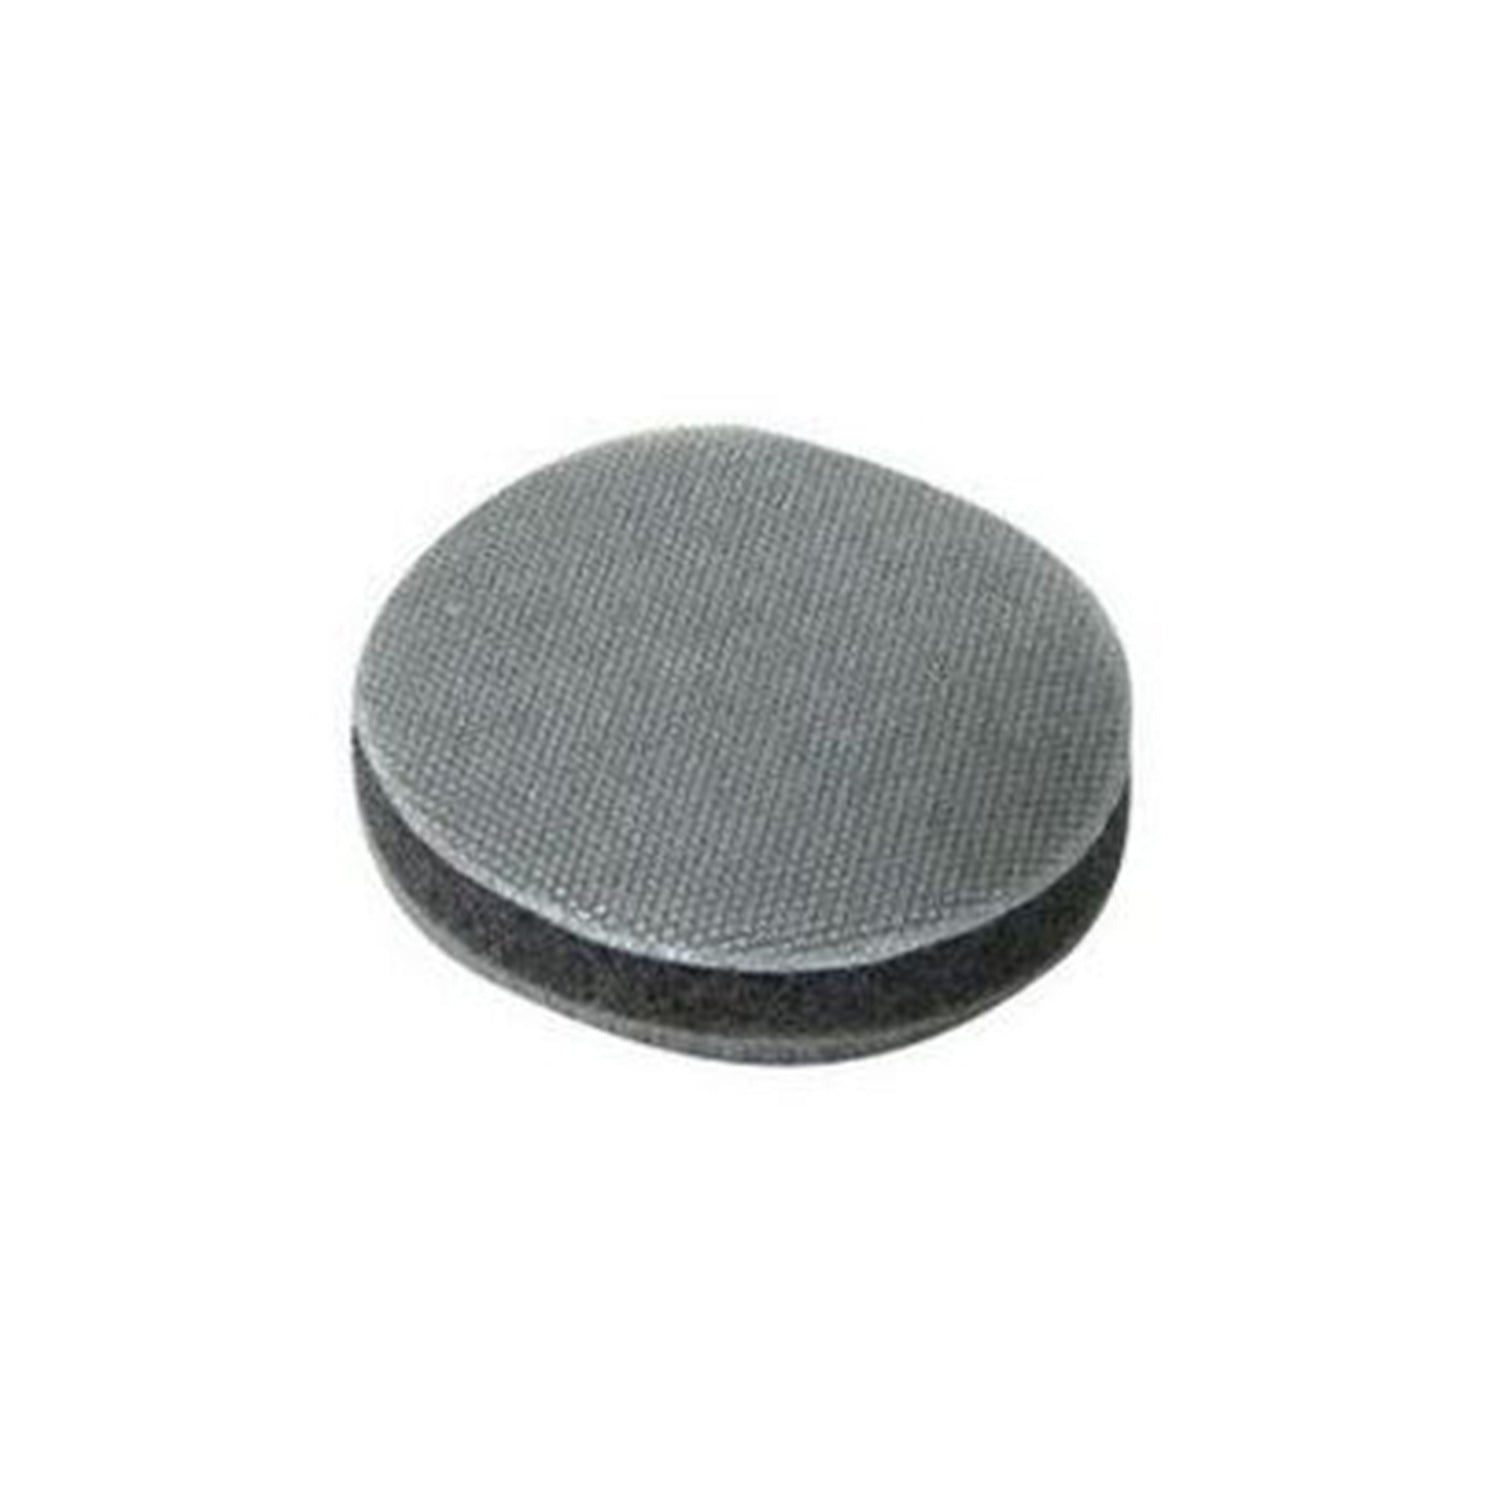 eagle-sandpaper-1-inch-interface-pad